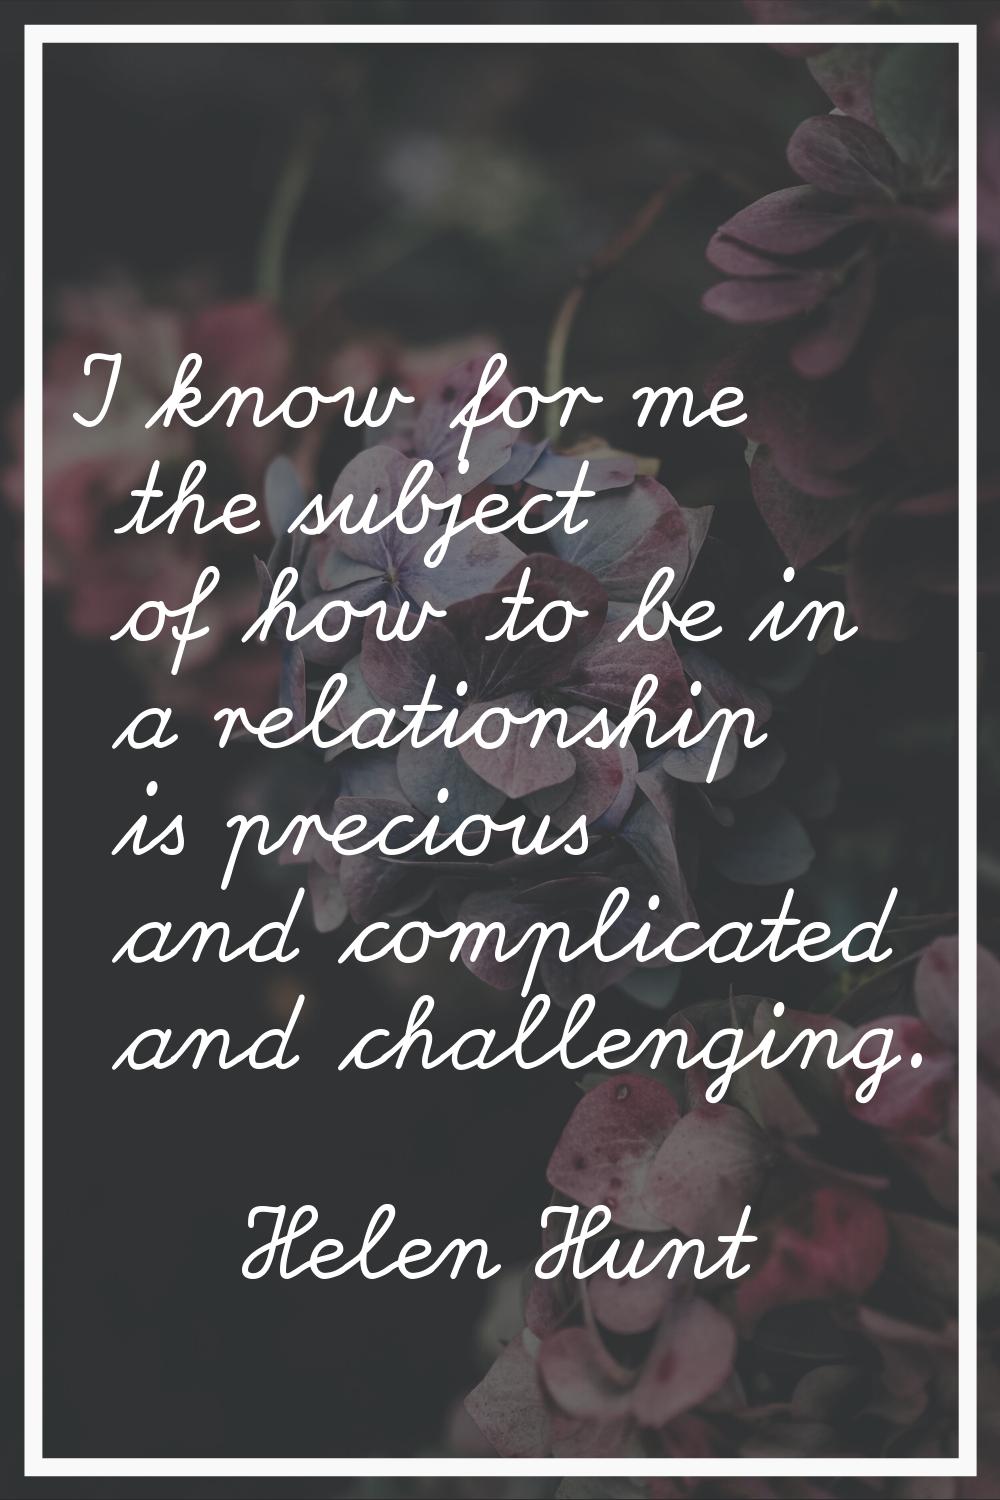 I know for me the subject of how to be in a relationship is precious and complicated and challengin